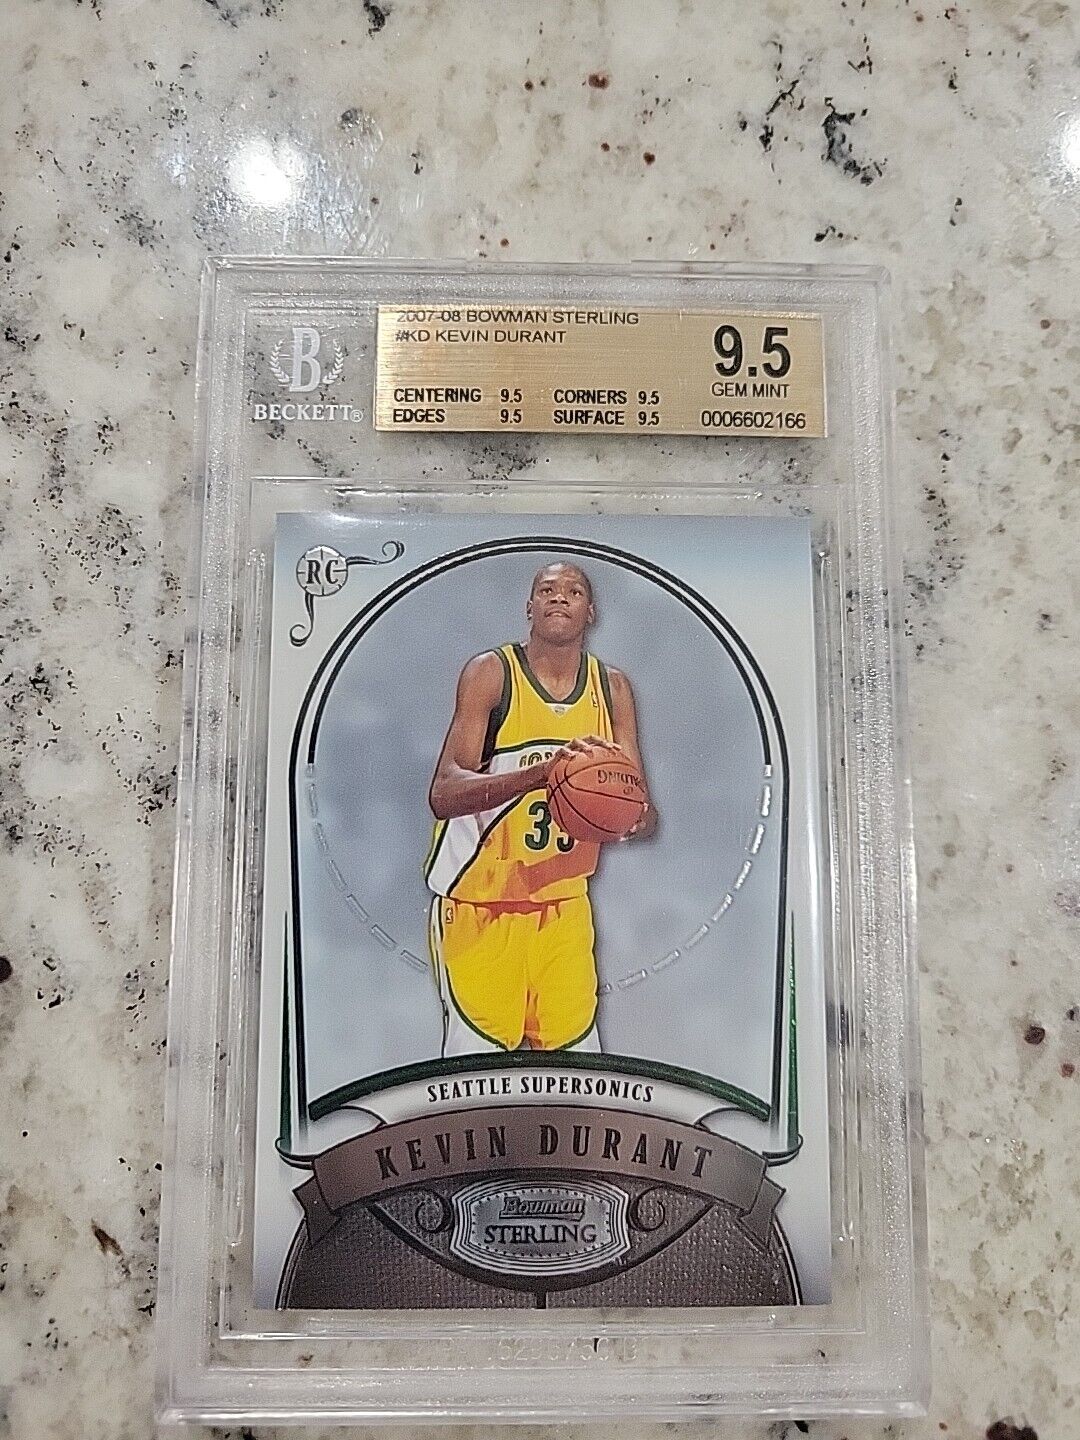 2007-08 Bowman Sterling Kevin Durant RC #KD BGS 9.5   Sonics